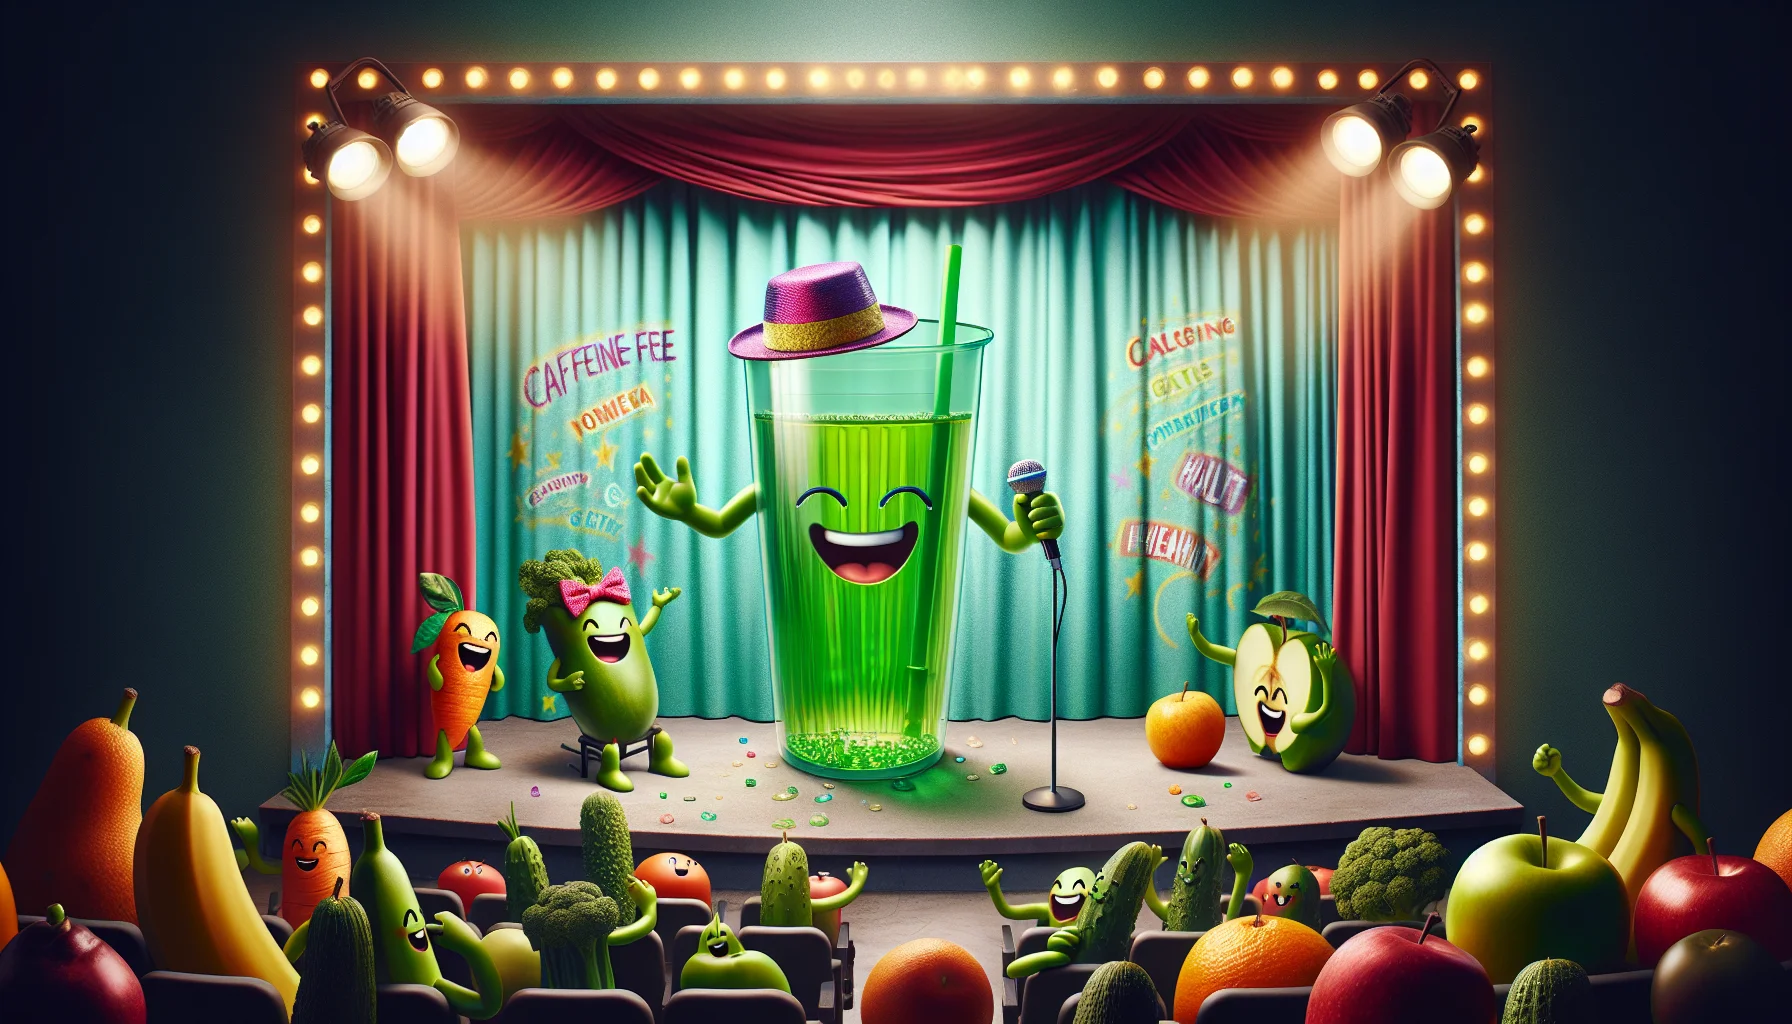 Visualize a playful and light-hearted scenario where a large transparent mug of caffeine-free green tea stands proudly on a comedy stage, catchy spotlights highlighting its bright green color. It is donned with colorful comedy hat and bow tie while holding a tiny microphone, performing an animated stand-up comedy routine. The audience consists of giggling fruits and vegetables, like oranges, apples, carrots and cucumbers showing various positive reactions. Skits painted on the backstage curtain represent themes of health and rejuvenation to symbolize the benefits of the tea. Everything is designed to evoke laughter and create an inviting atmosphere to enjoy the tea.